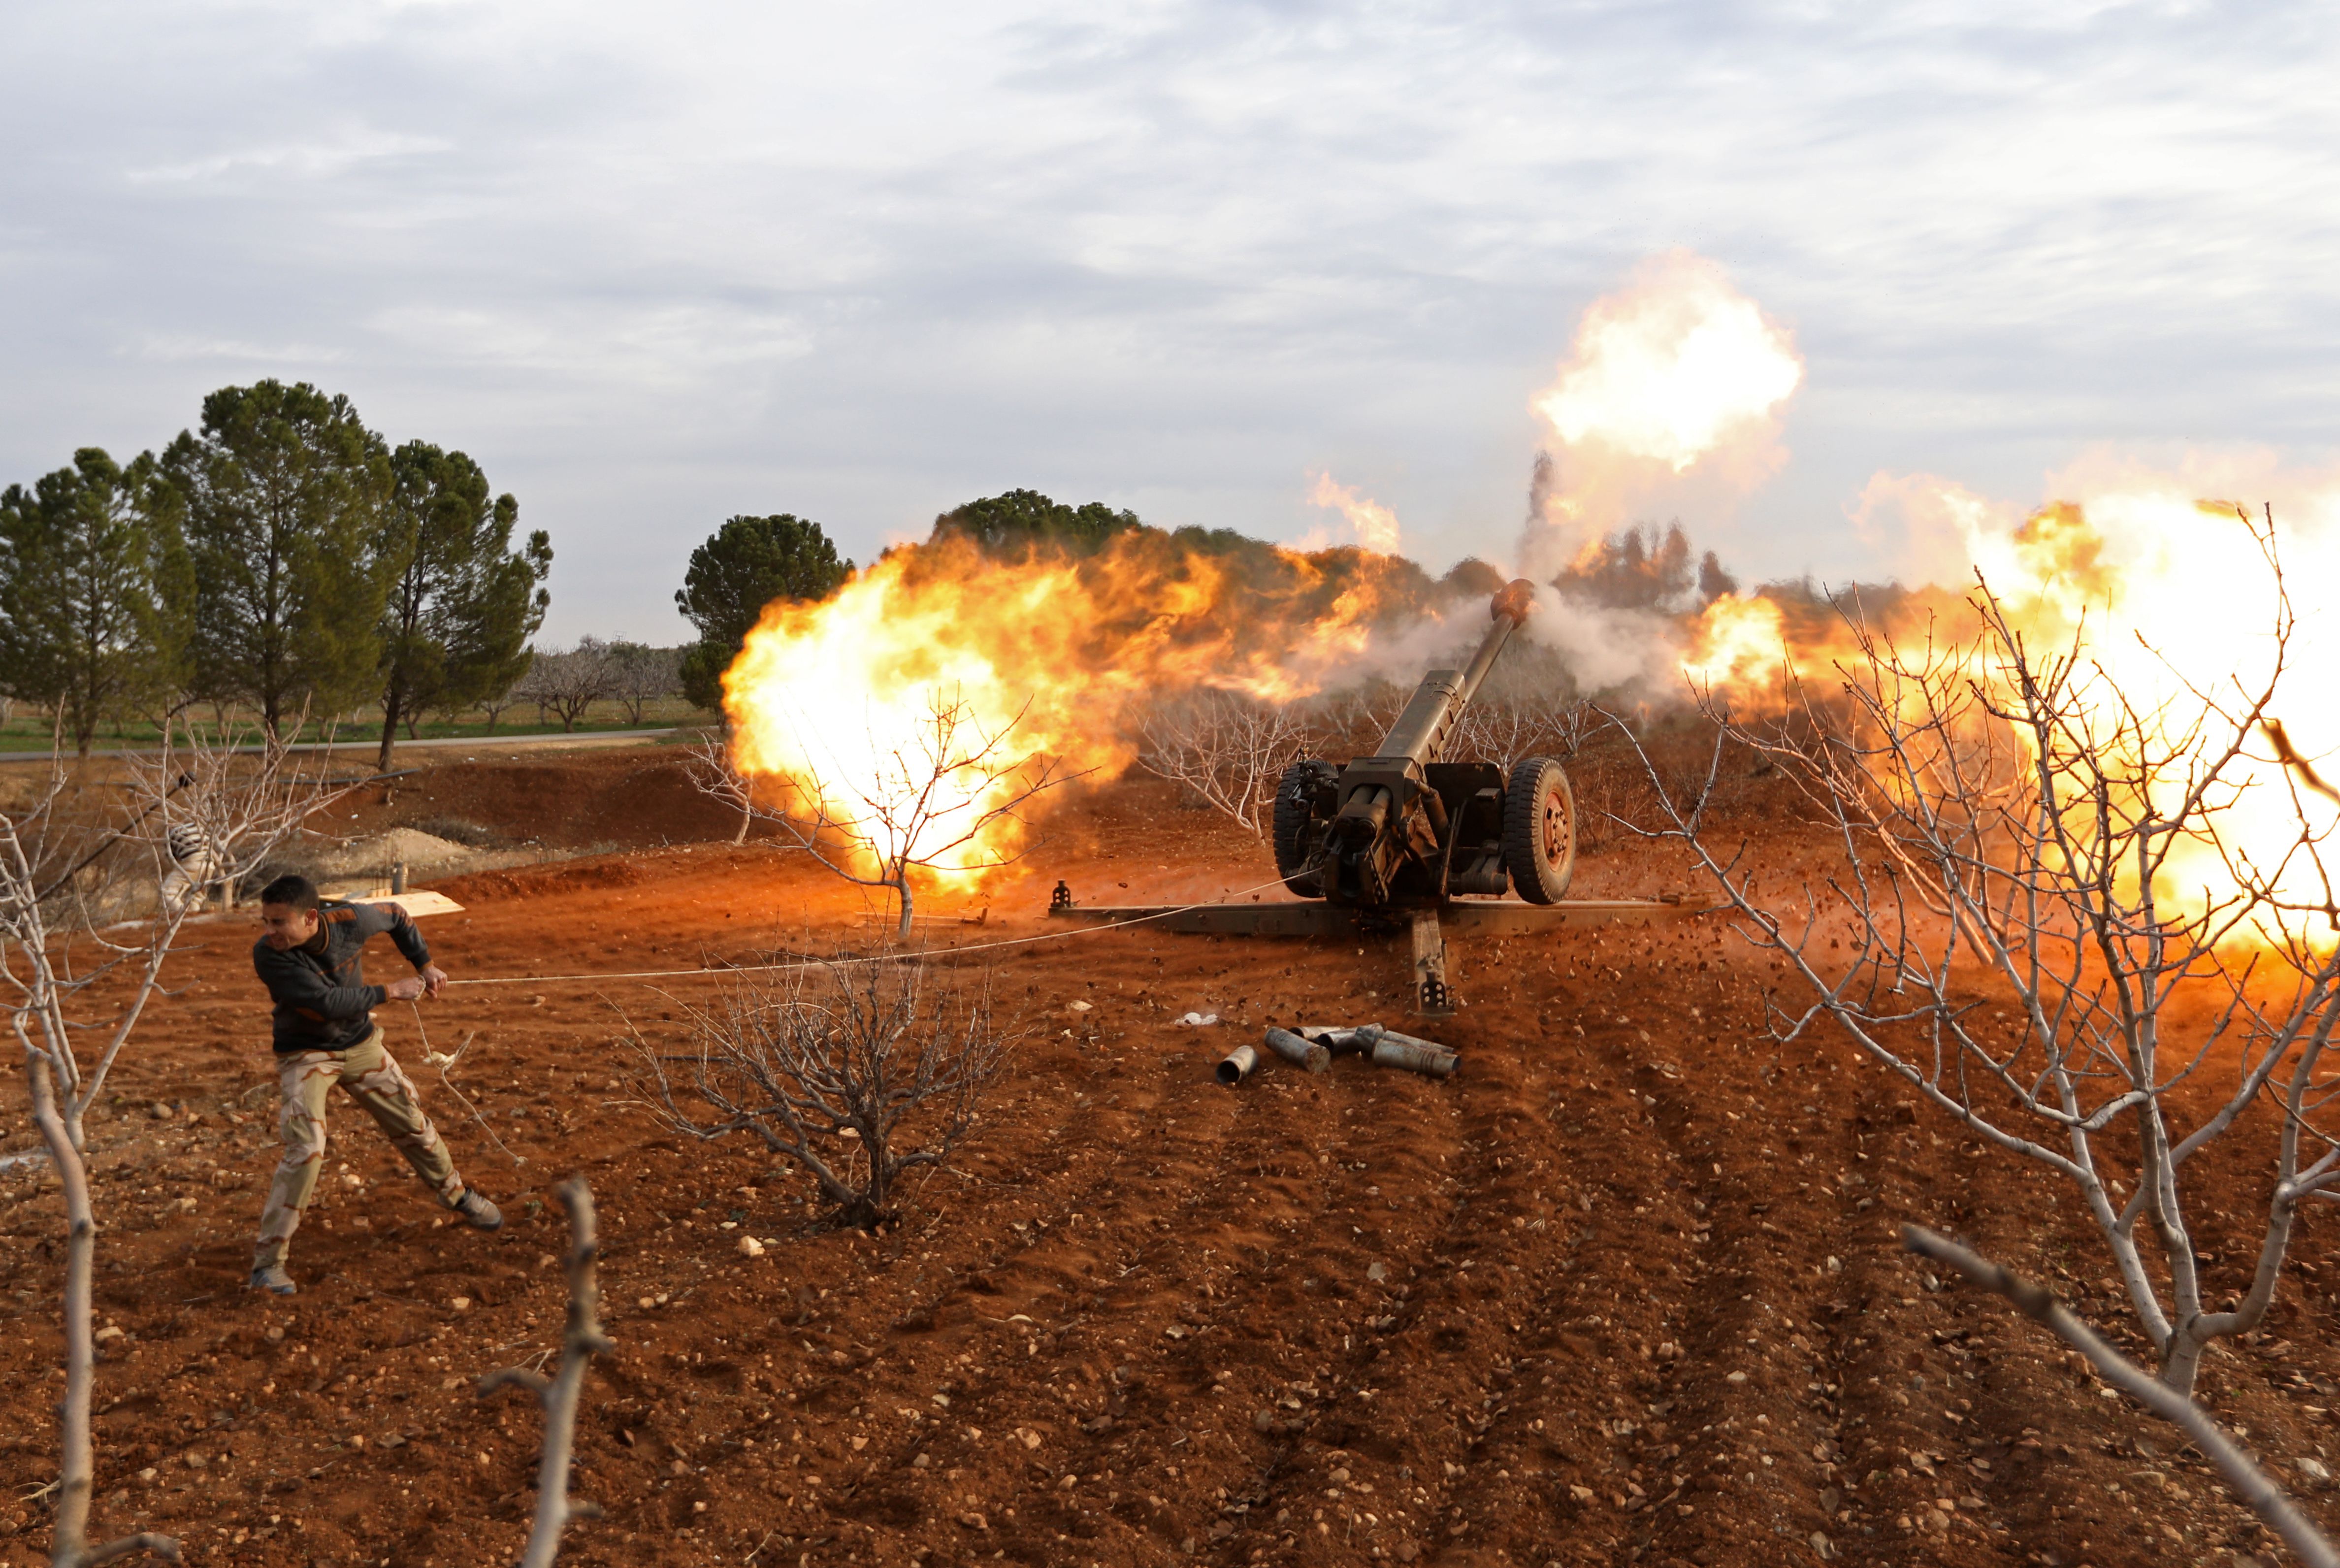 An opposition fighter fires a gun from a village near al-Tamanah during ongoing battles with government forces in Syria’s Idlib province. (OMAR HAJ KADOUR/AFP/Getty Images)